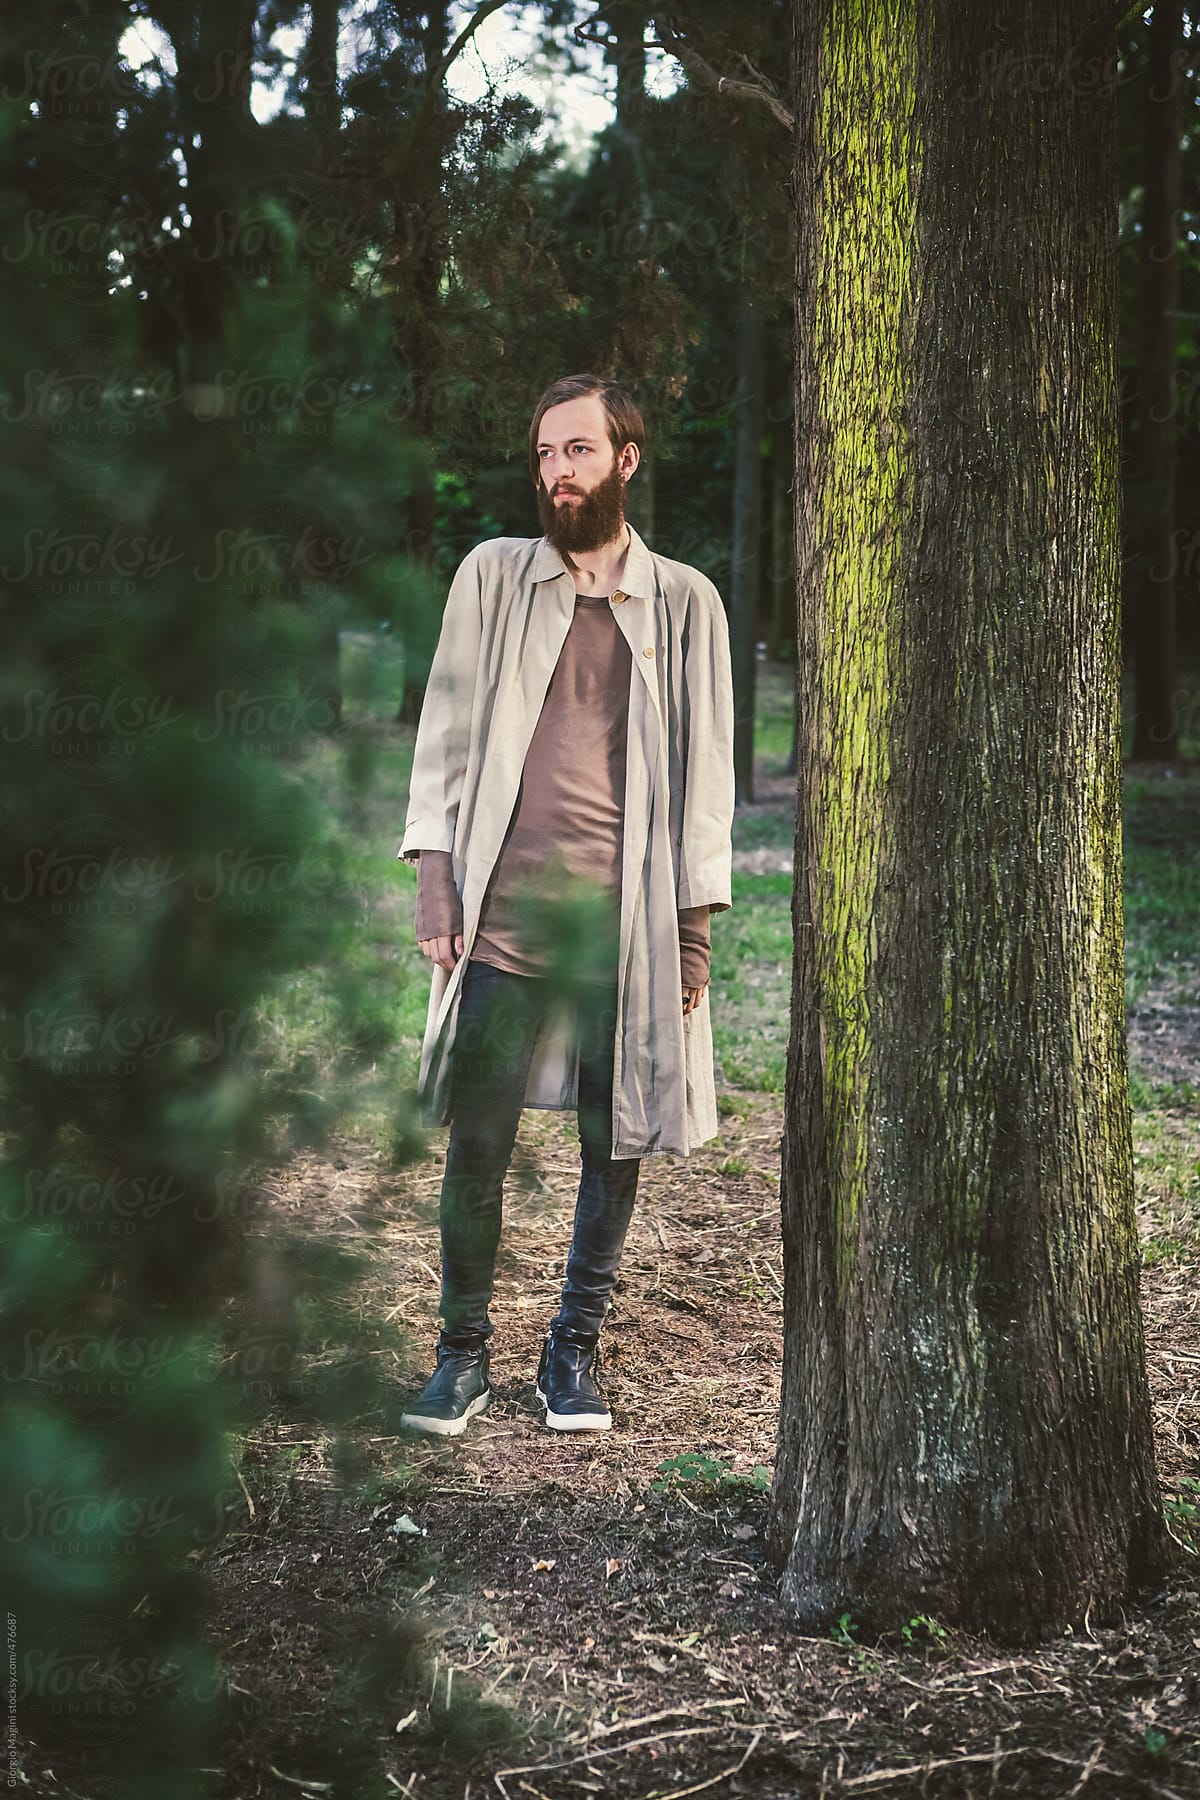 Bearded Young Man with Dark Fashion Clothes in the Woods